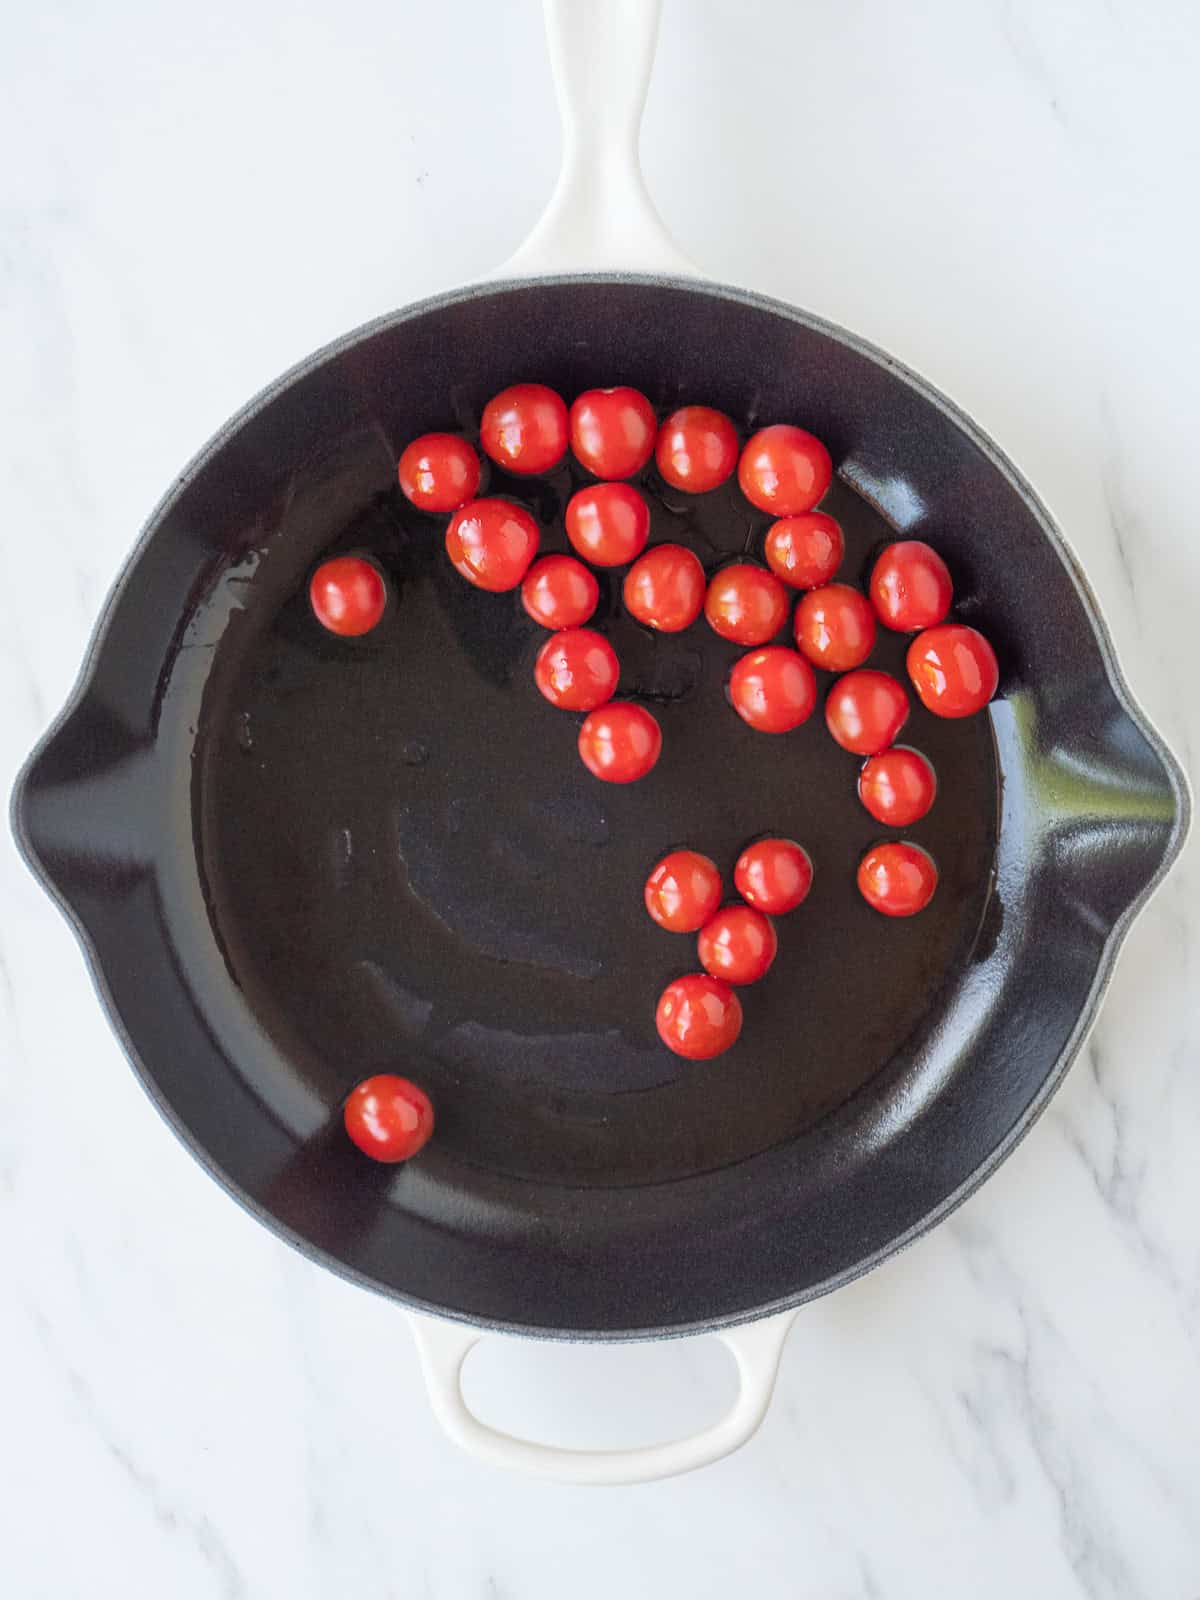 A skillet with olive oil and cherry tomatoes added to it.